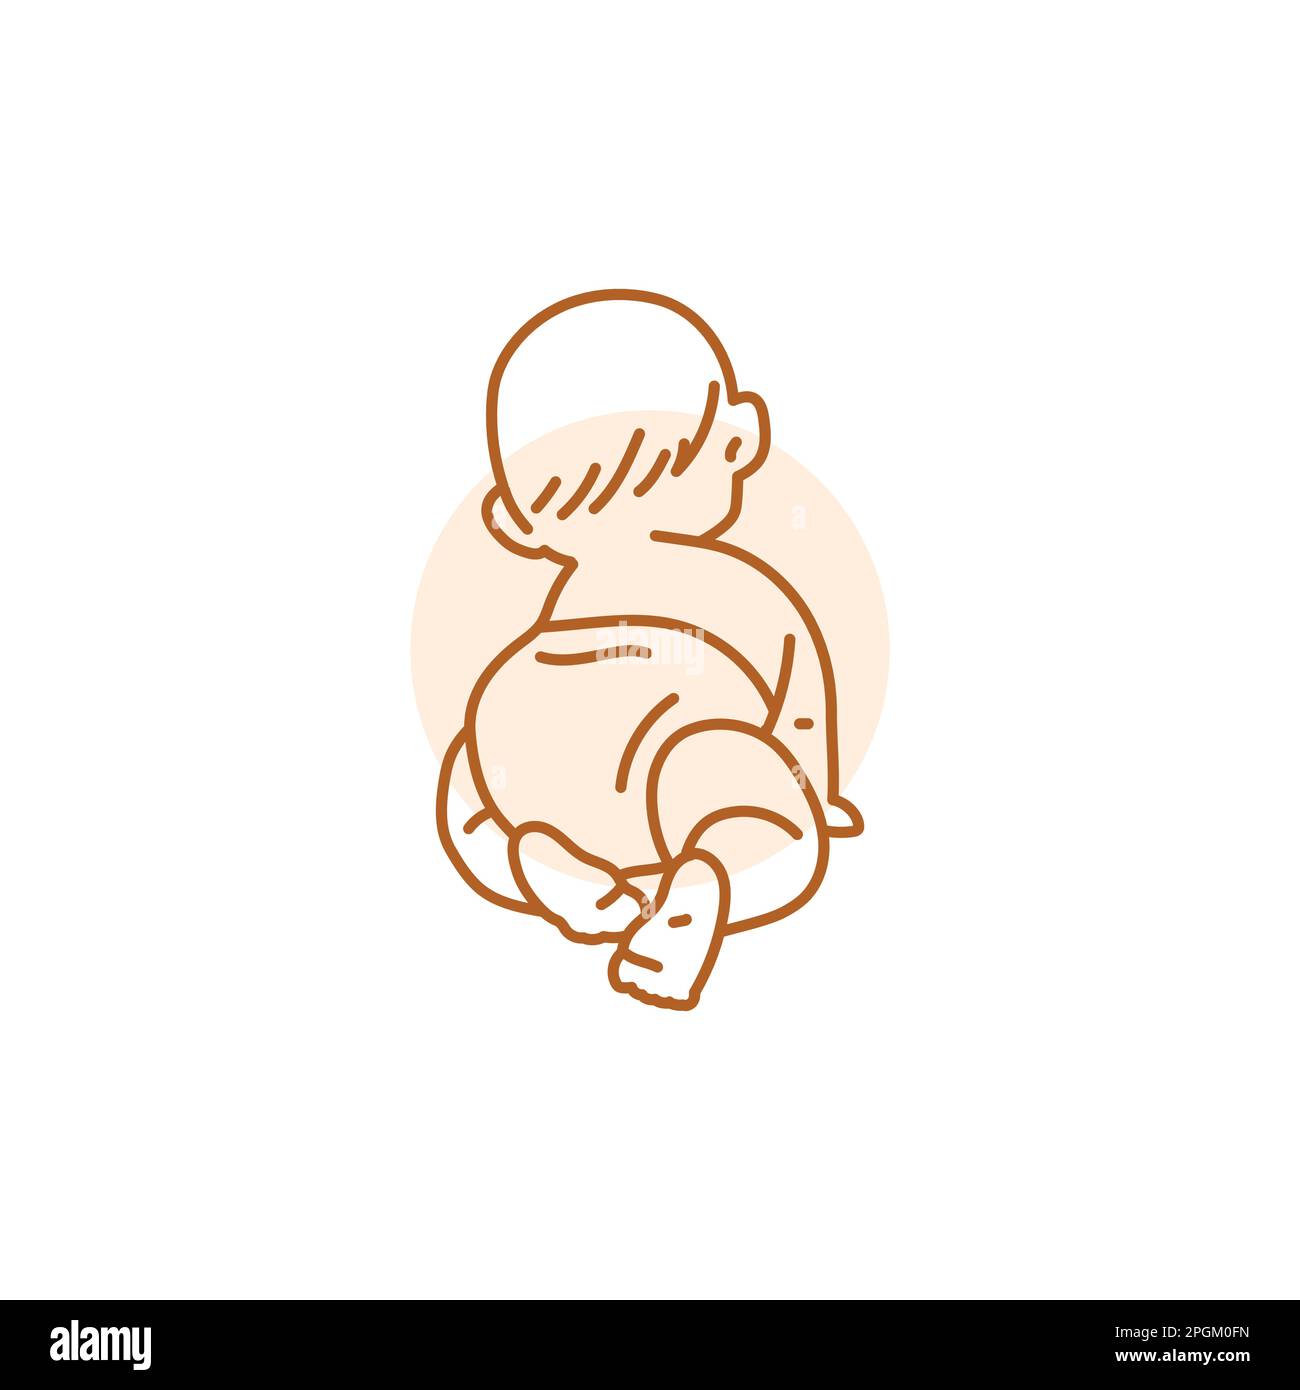 Growing Up Vector Hd PNG Images, Baby Boy Growing Up Process, Vector,  Growth, Pacifier PNG Image For Free Download